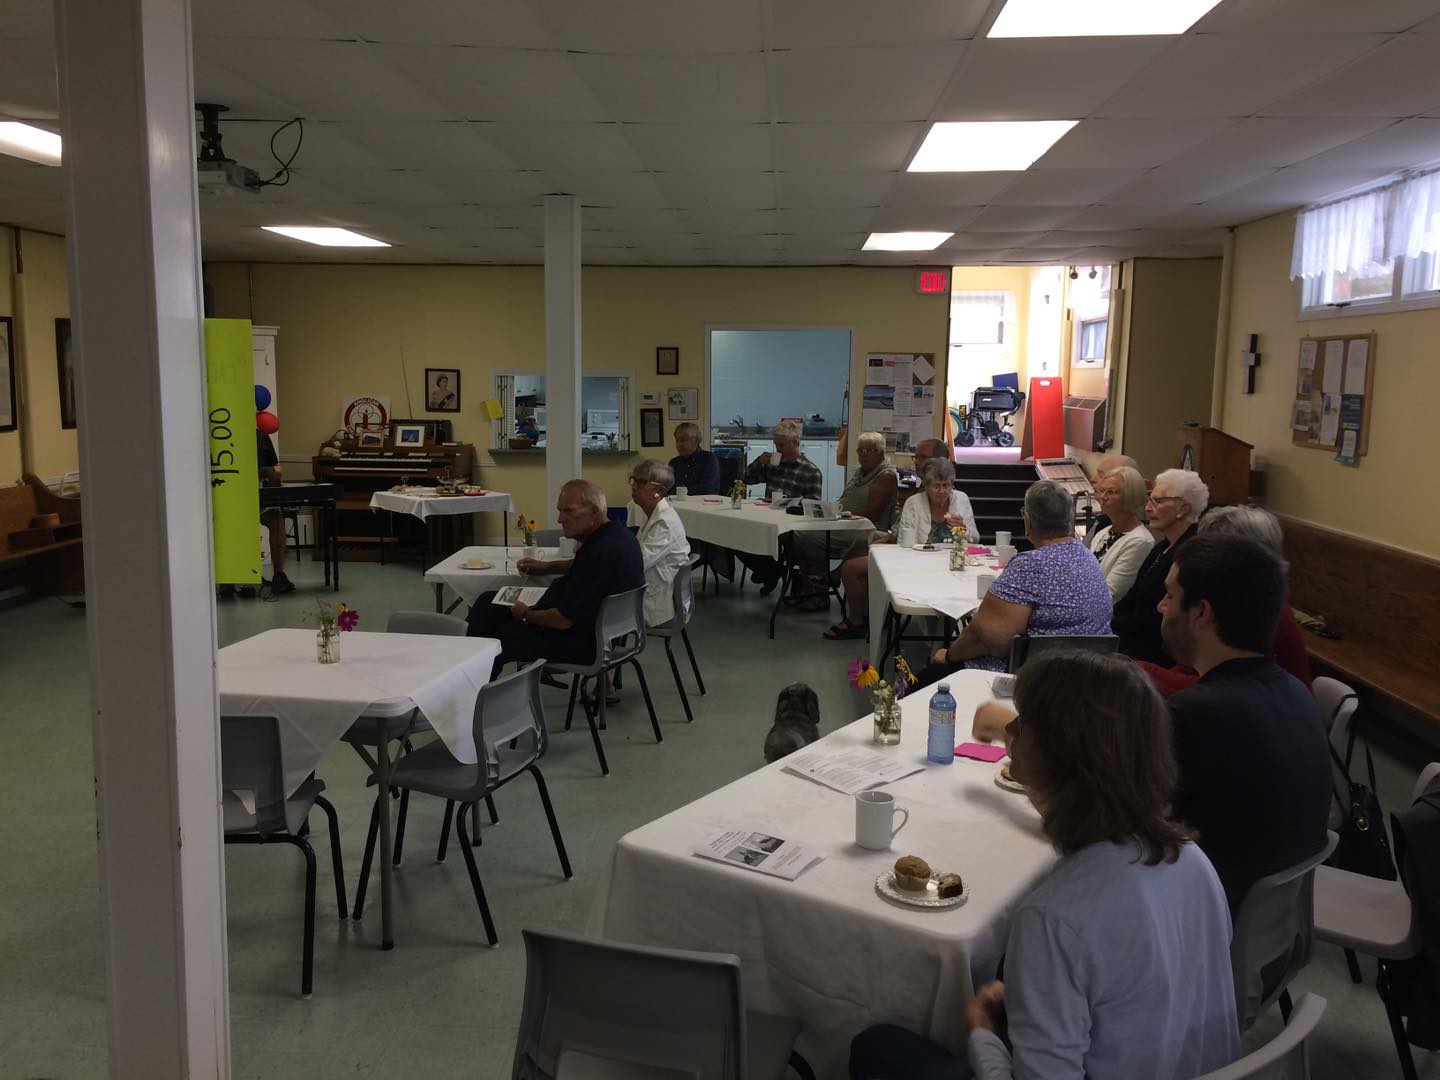 St. Luke's congregation enjoyed our second cafe church on Sunday, August 27th. A special thanks to everyone who made these services possible, especially Rev. Jerry Cavanaugh who led us in Morning Prayer.